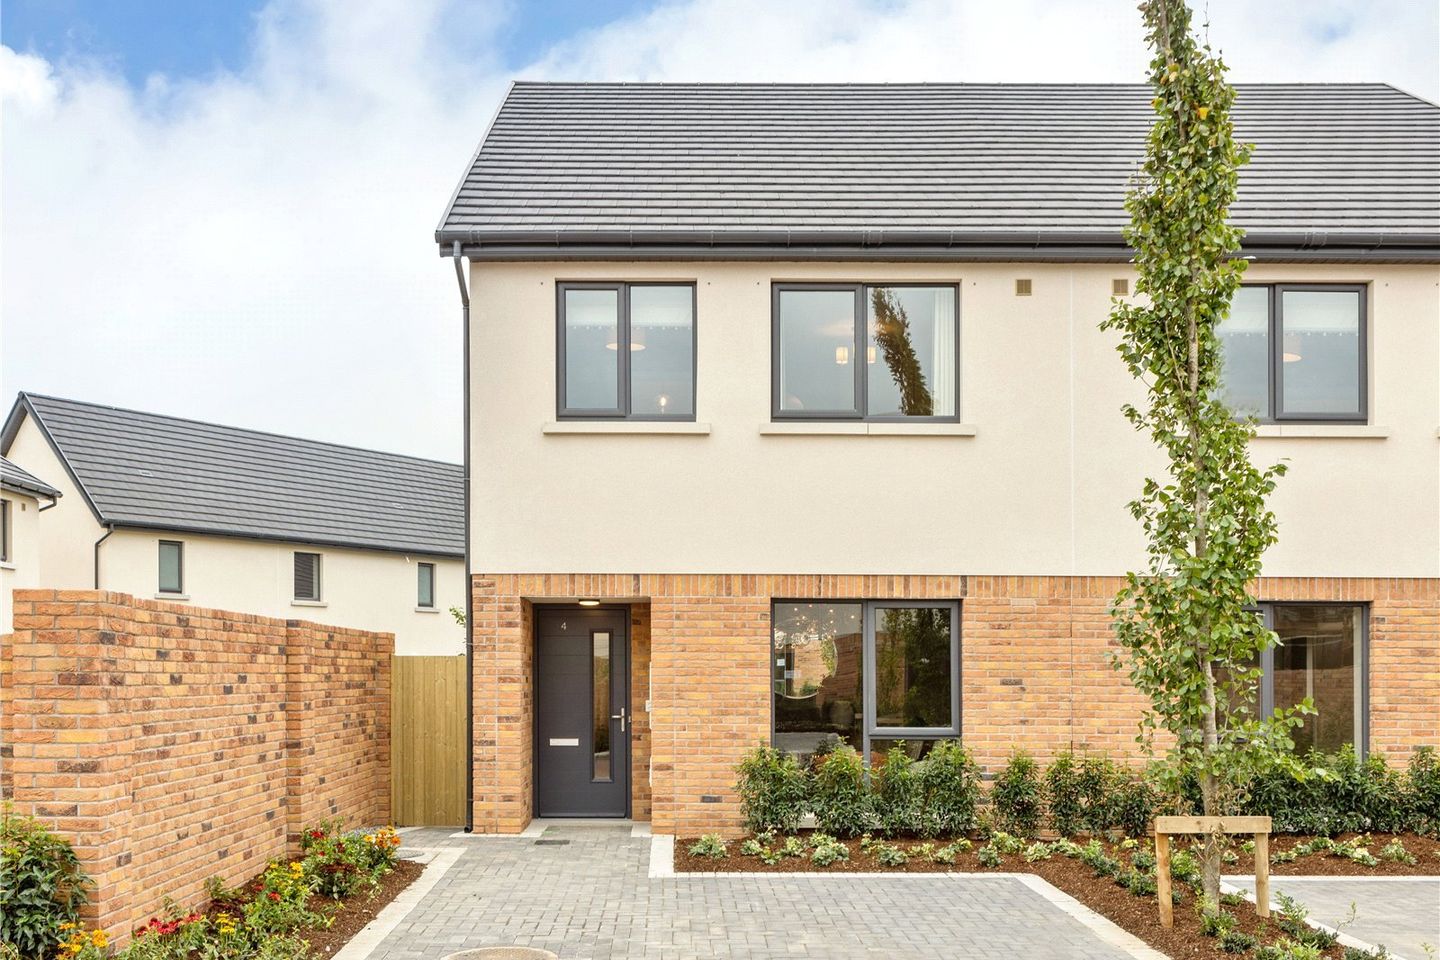 3 Bedroom House, The Blossoms At Tandy's Lane, 3 Bedroom House, The Blossoms At Tandy's Lane, Adamstown, Lucan, Co. Dublin